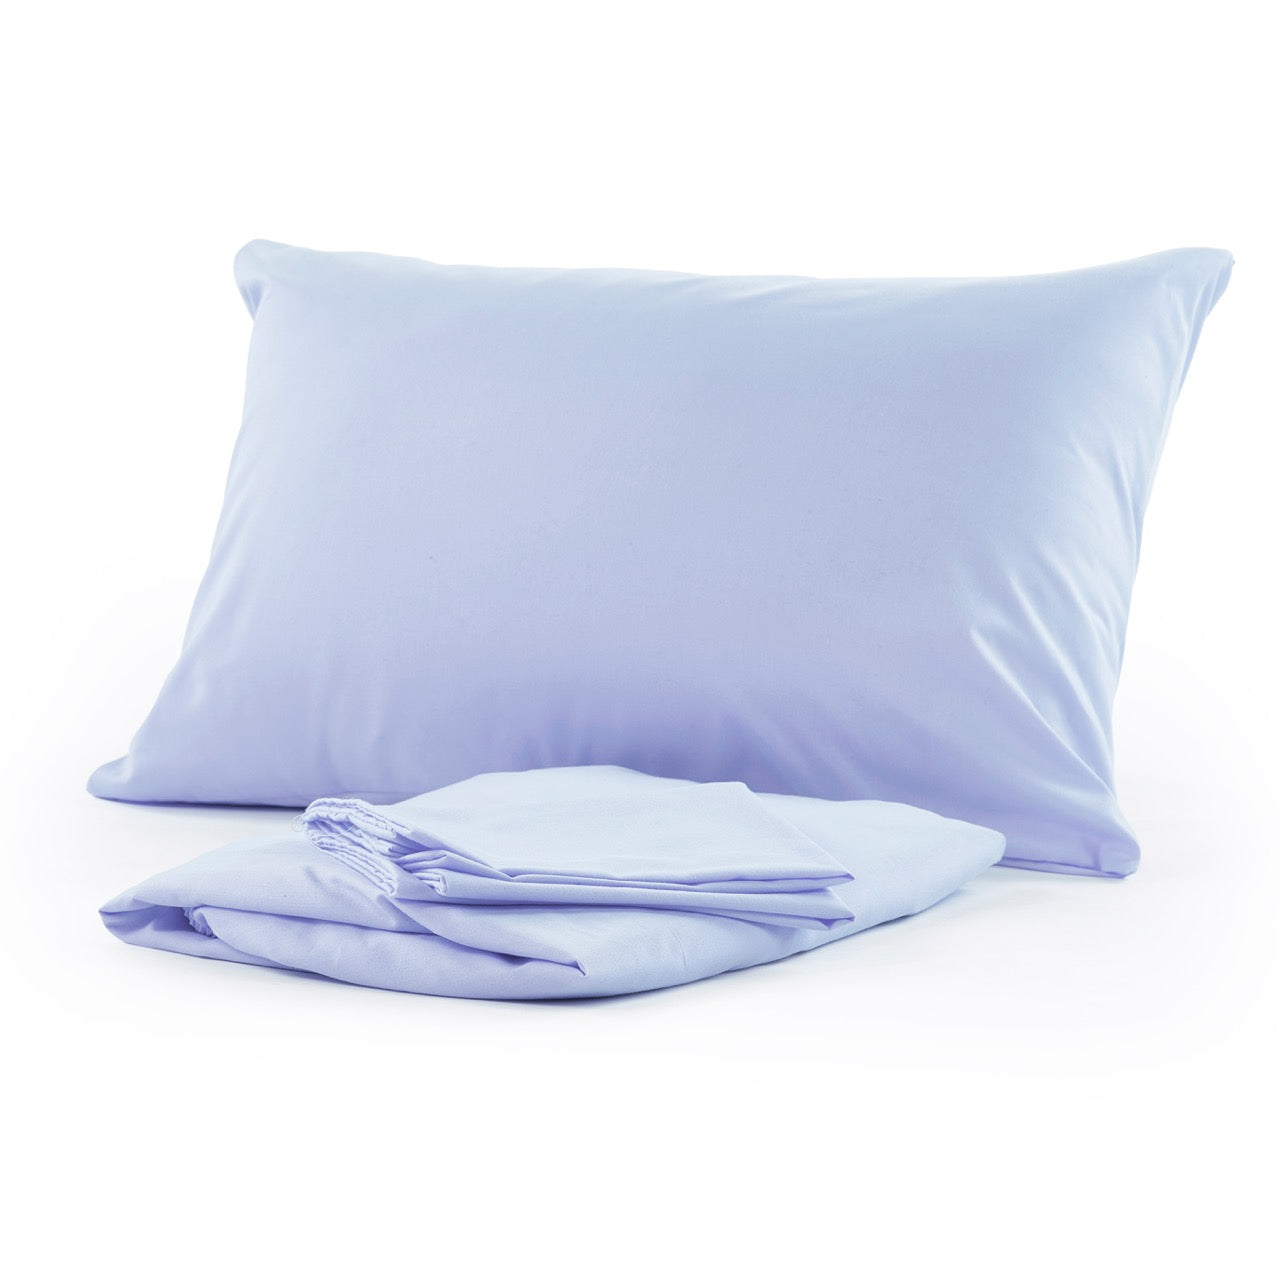 Ronjy- Fitted Cotton Bed Sheet Set